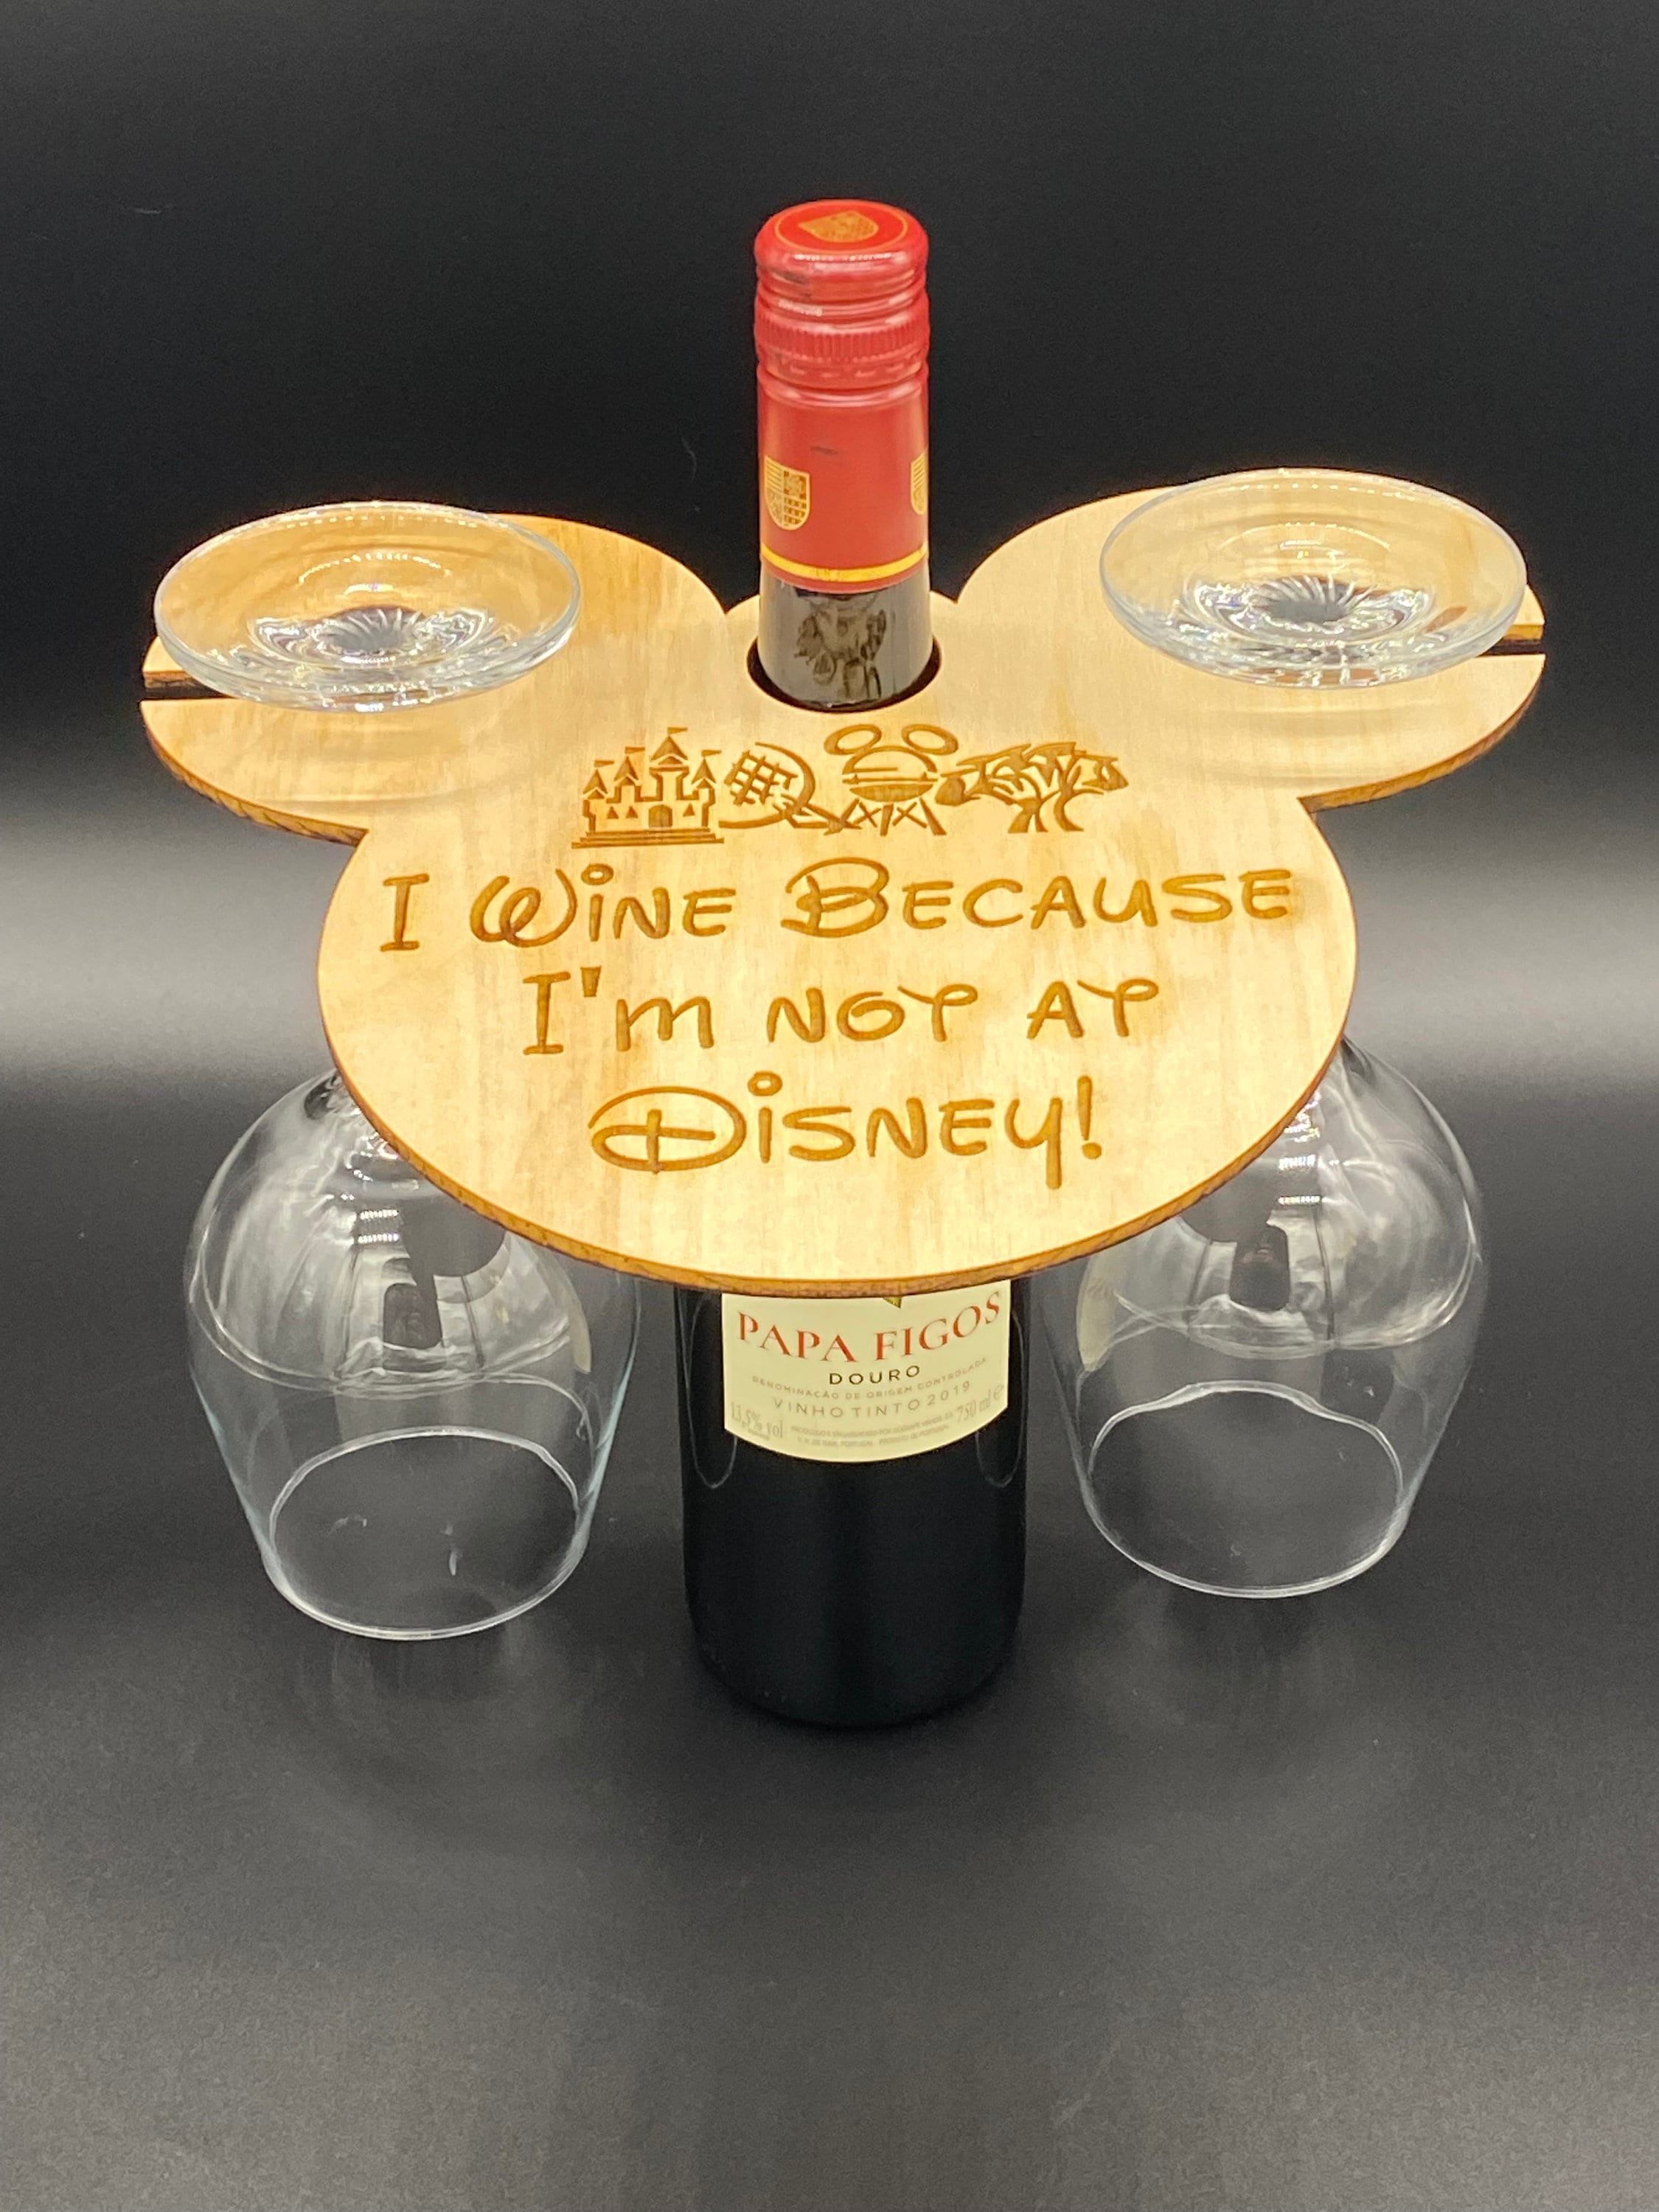 Mickey Mouse and Minnie Mouse Personalised Wine Glass Set of 2 Wedding Gift  Hand Etched Glass, Ideal Gift, Red, White Wine.85 